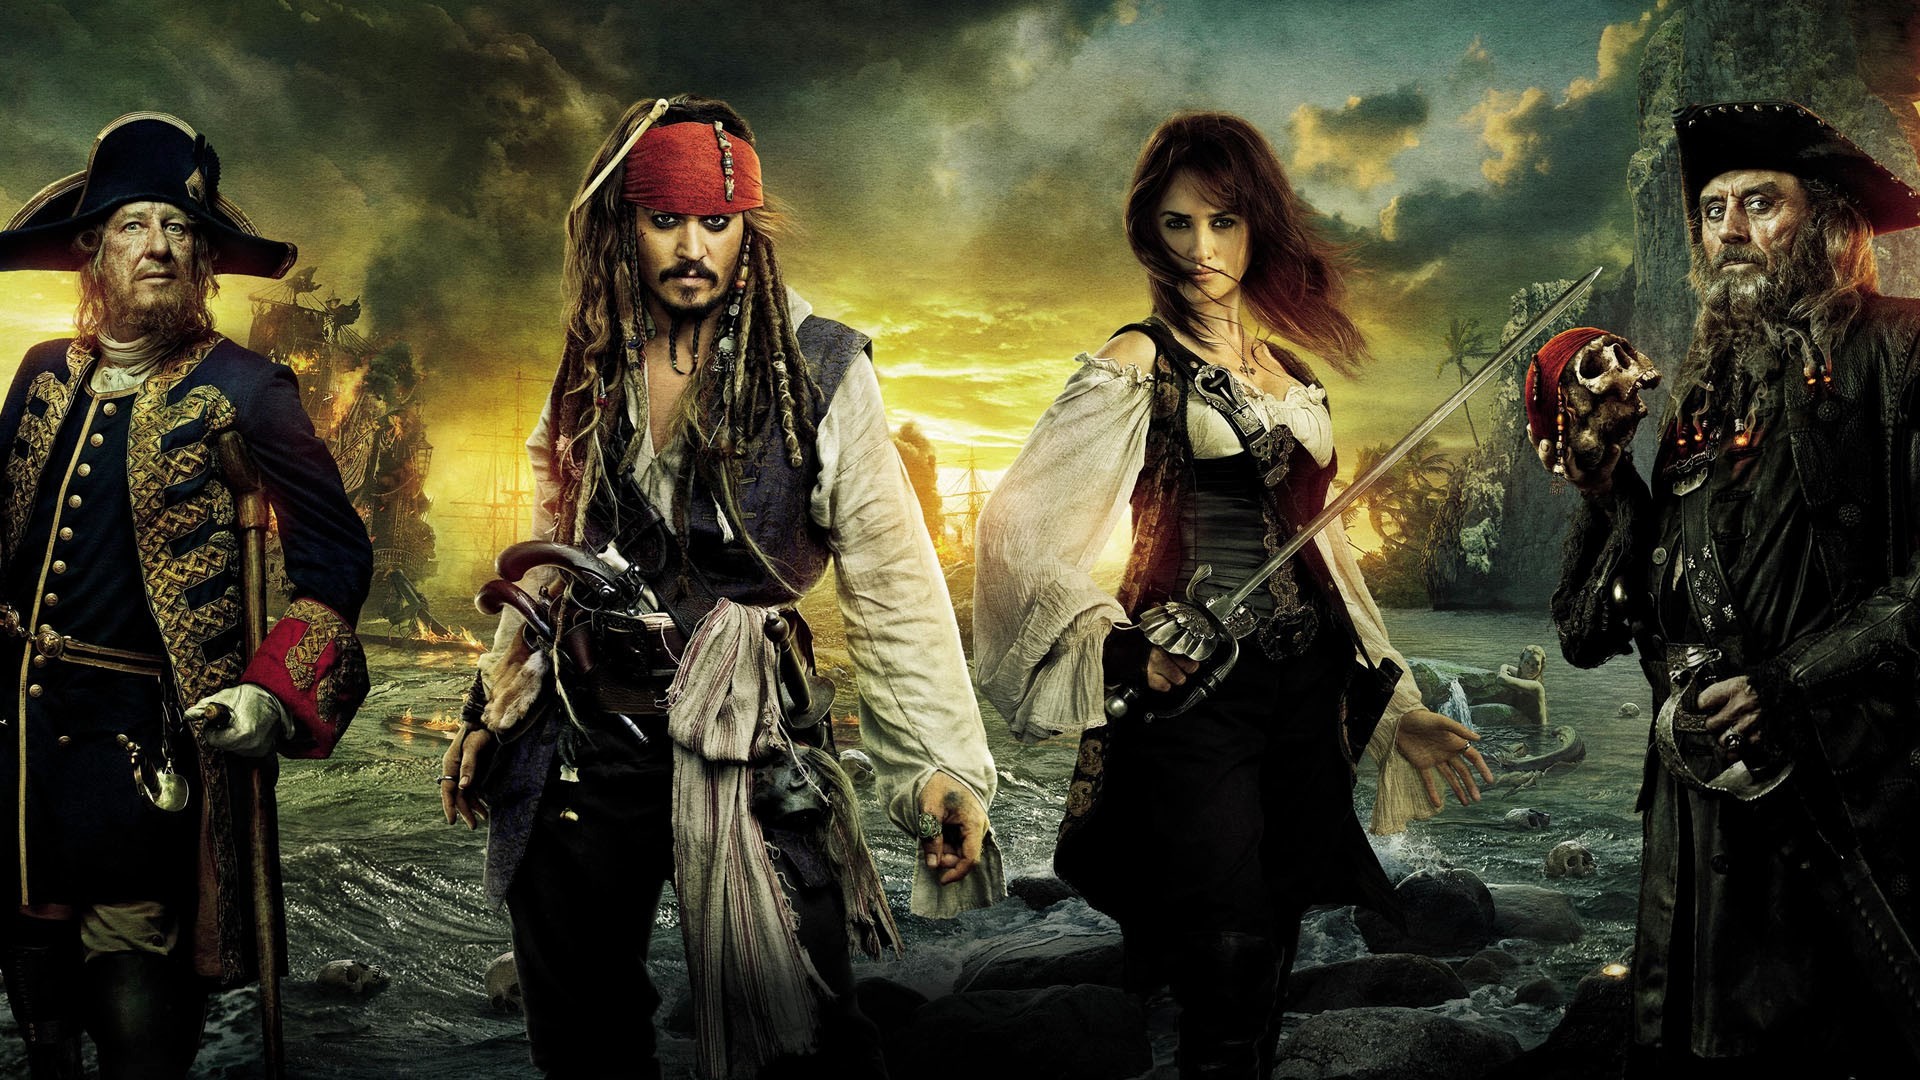 pirates of the caribbean wallpaper for android,action adventure game,cg artwork,adventure game,games,illustration